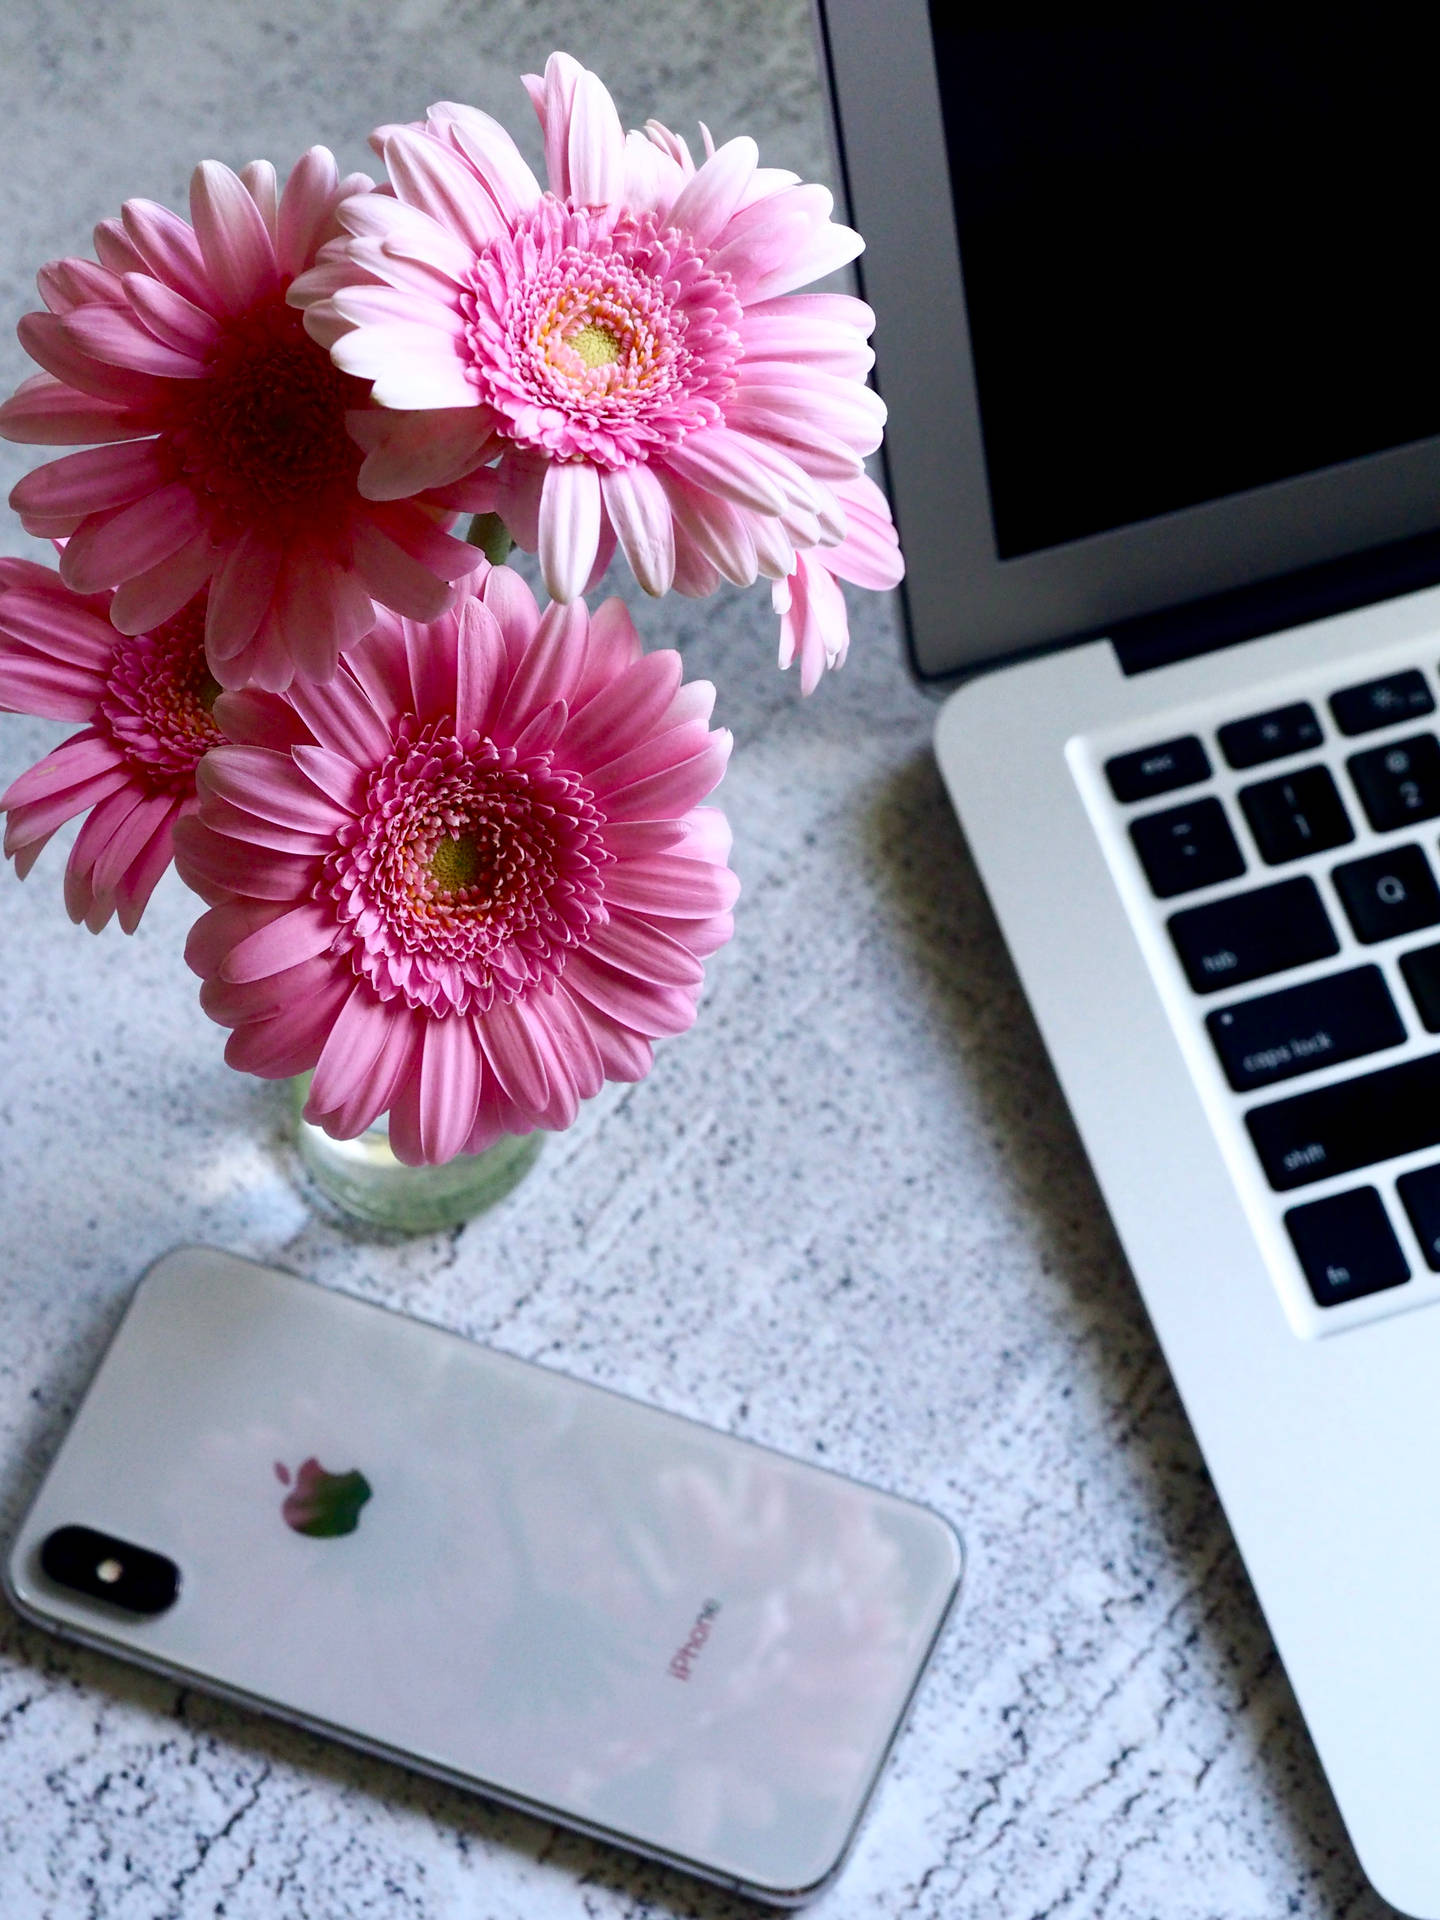 Iphone Desk With Pink Flowers Picture